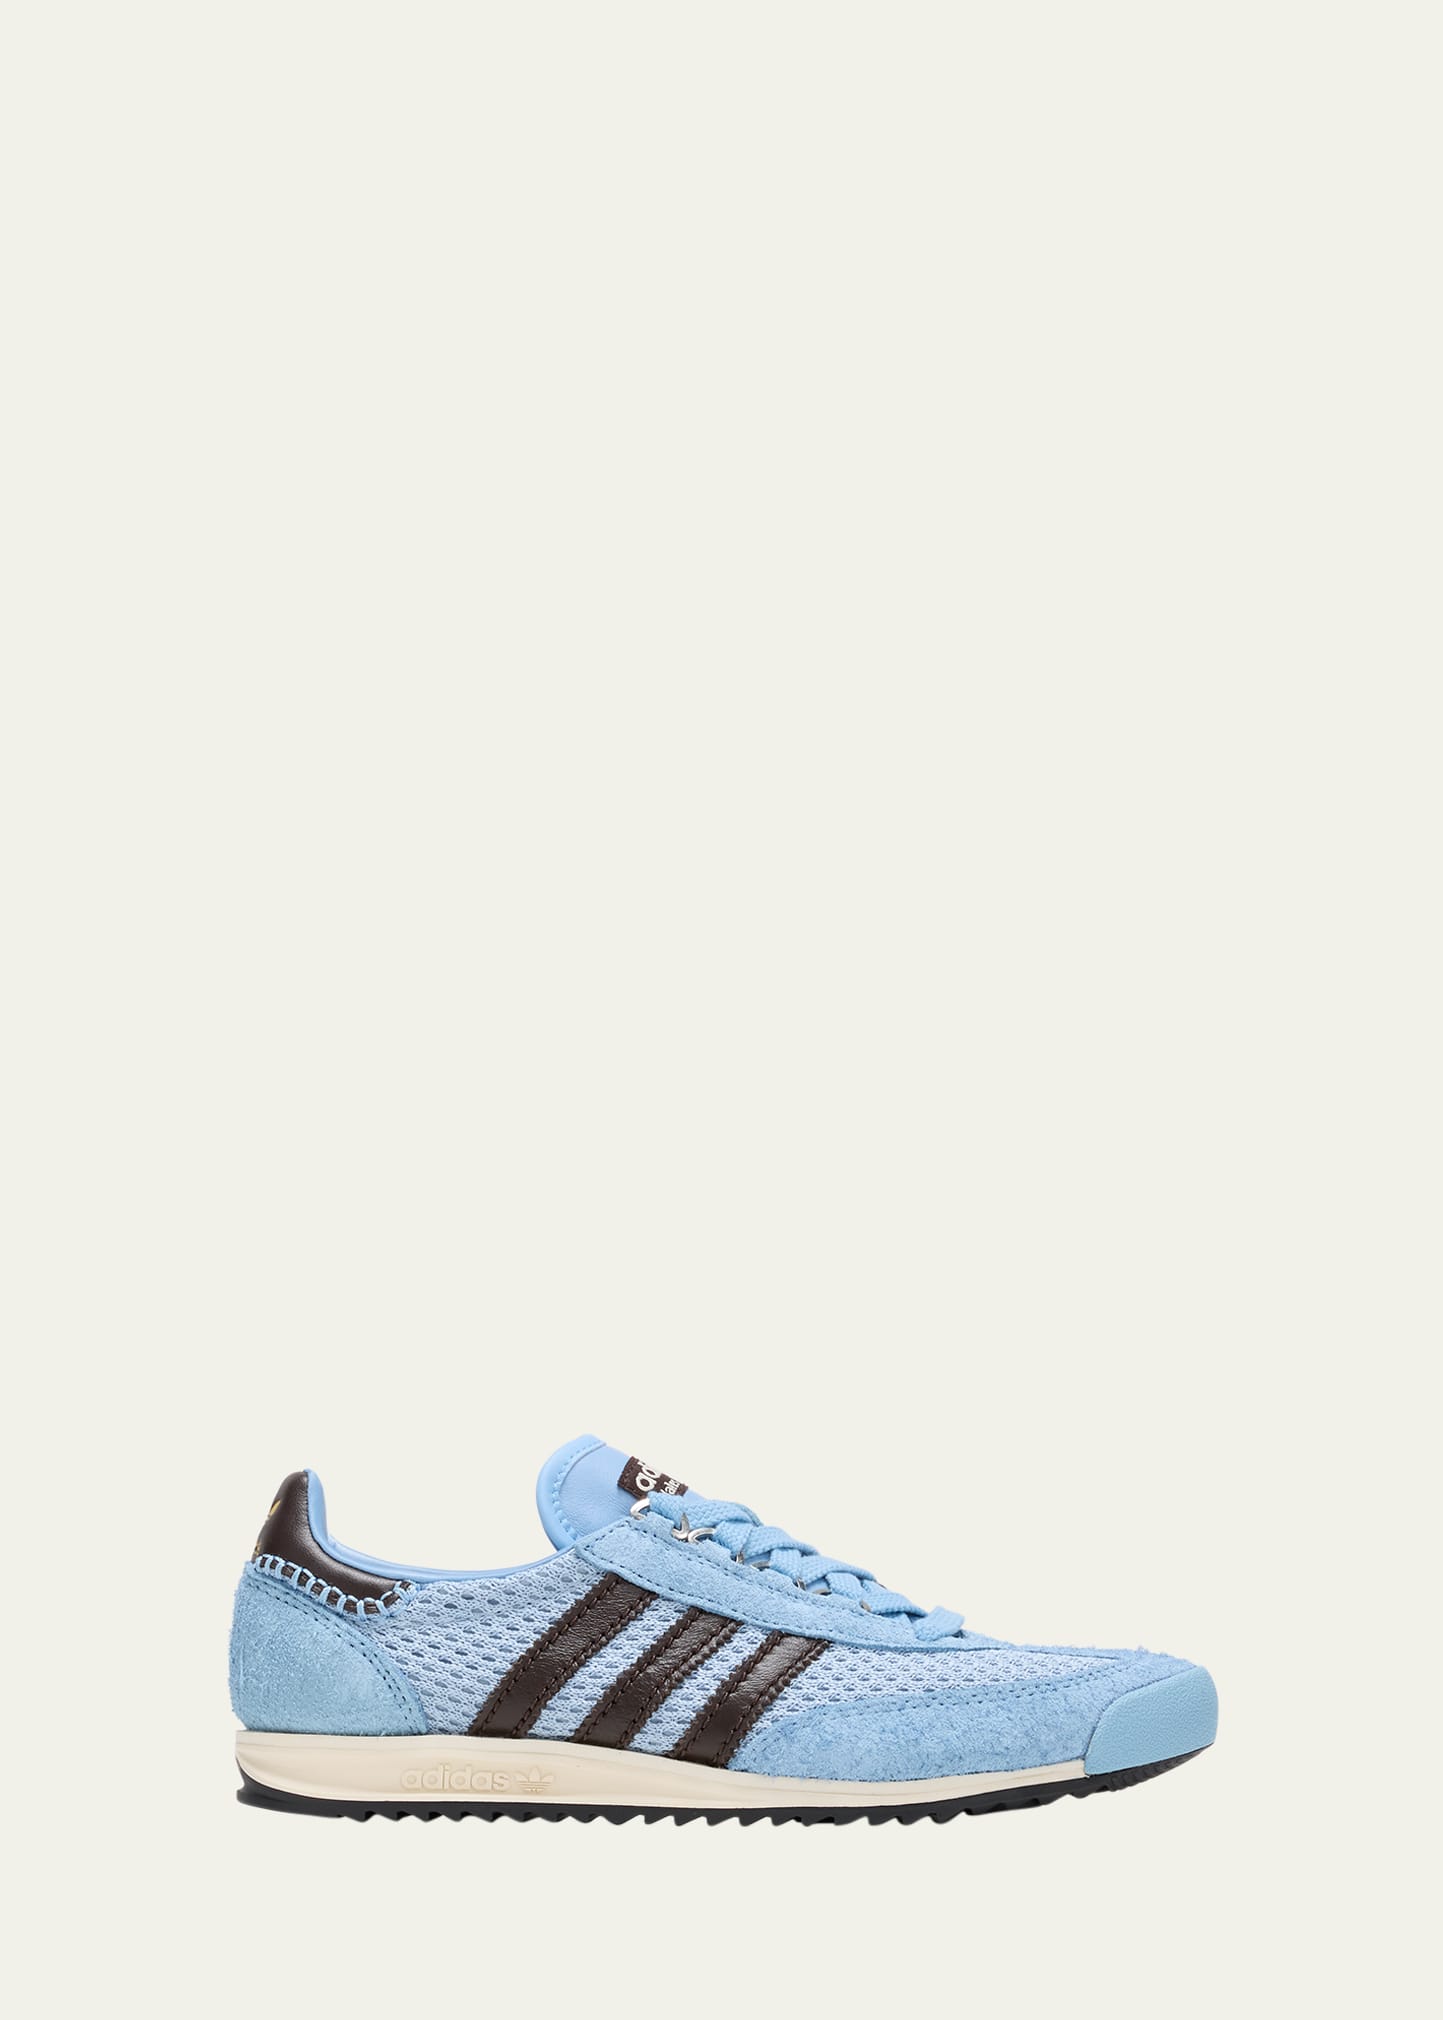 Adidas X Wales Bonner X Adidas Sl76 Mesh Suede Sneakers In Blue